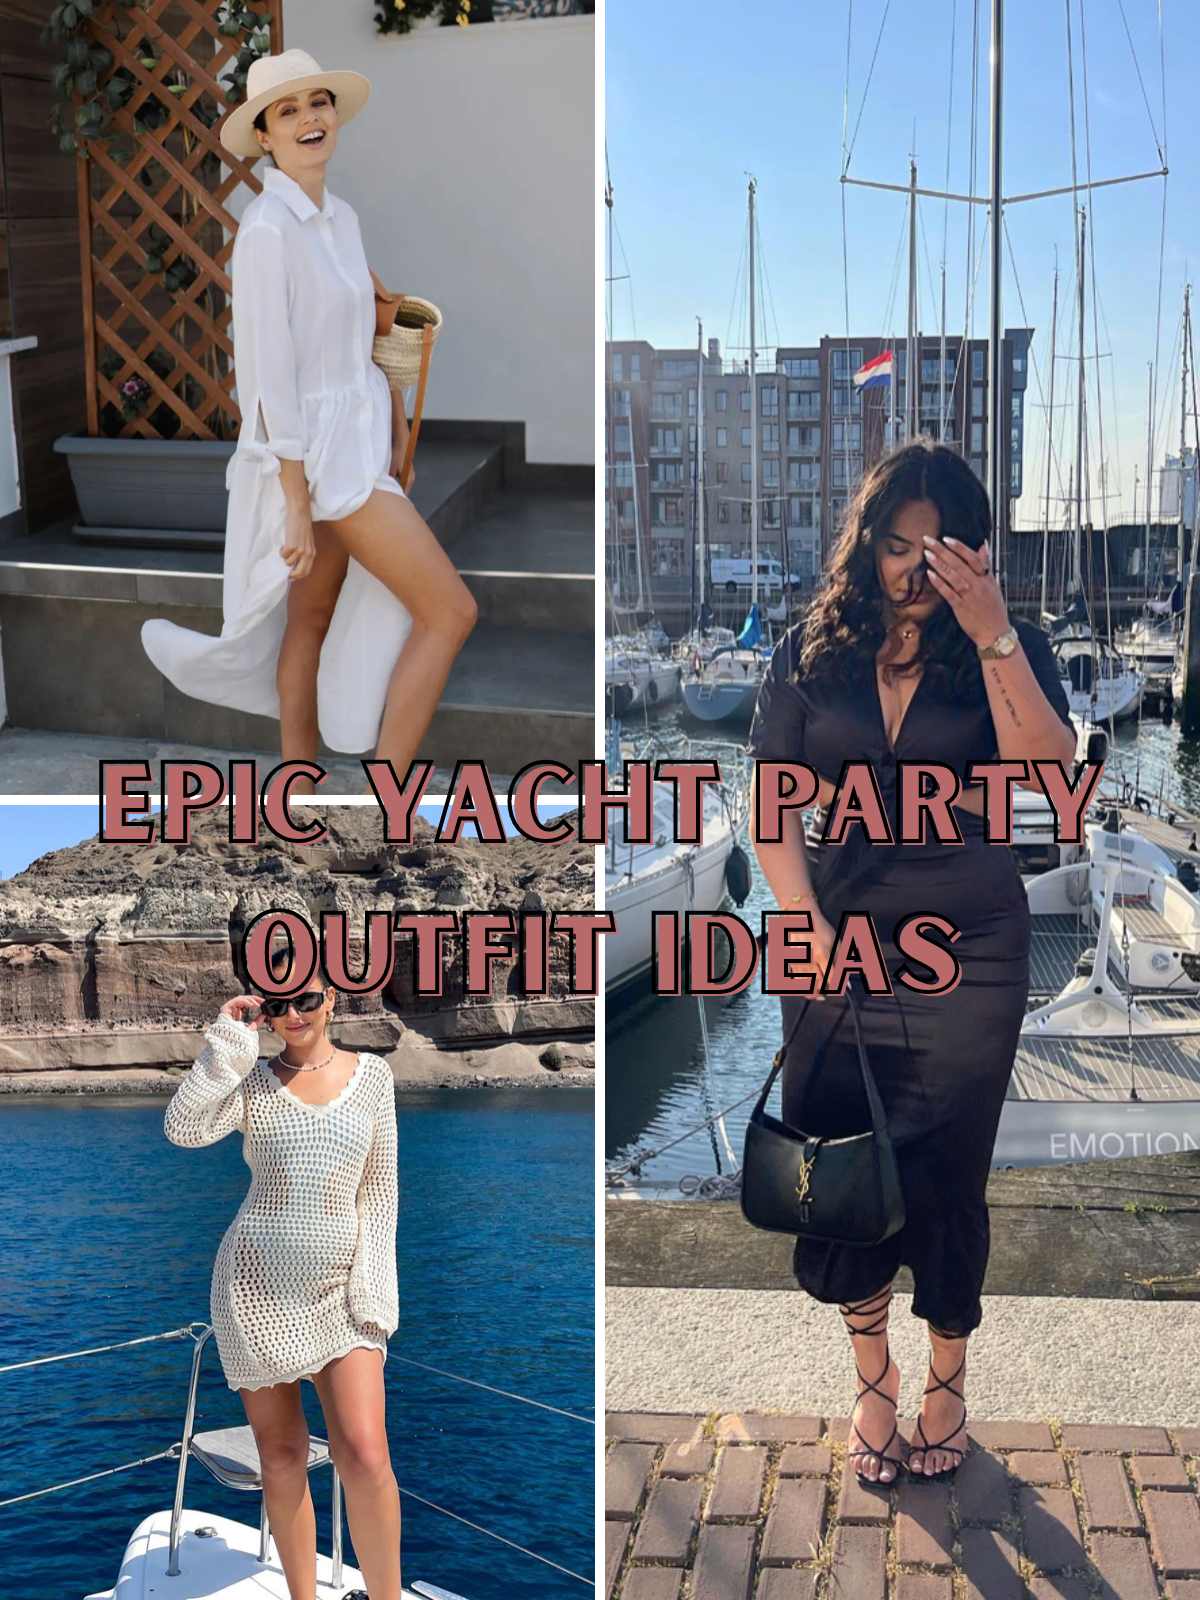 3 different yacht party ideas